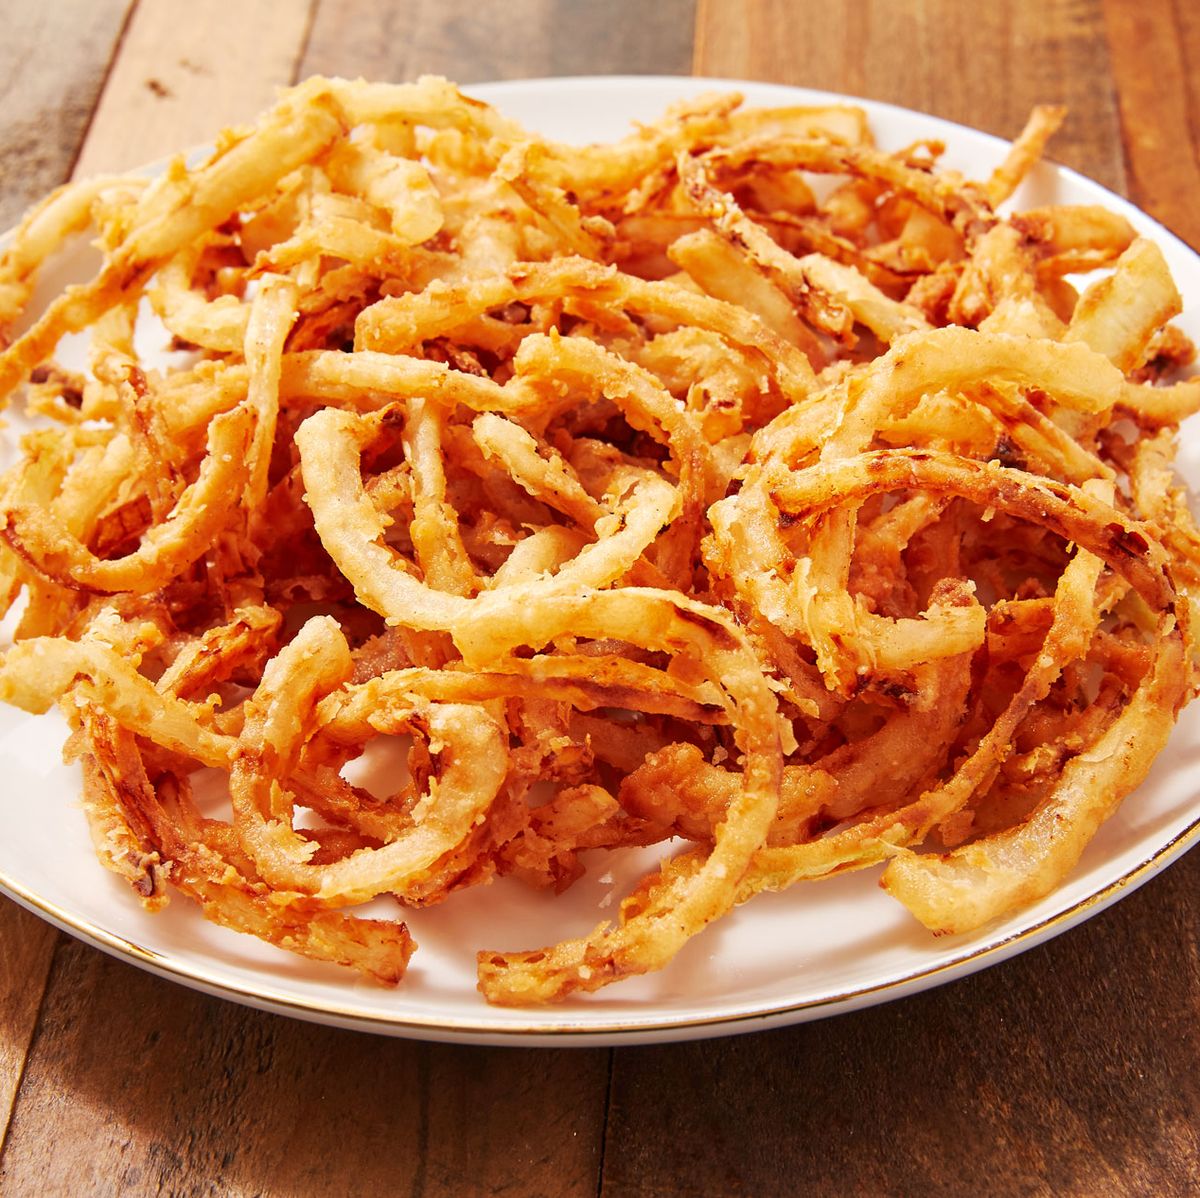 Crispy Fried Onions, A Great Put It On Everything Topping